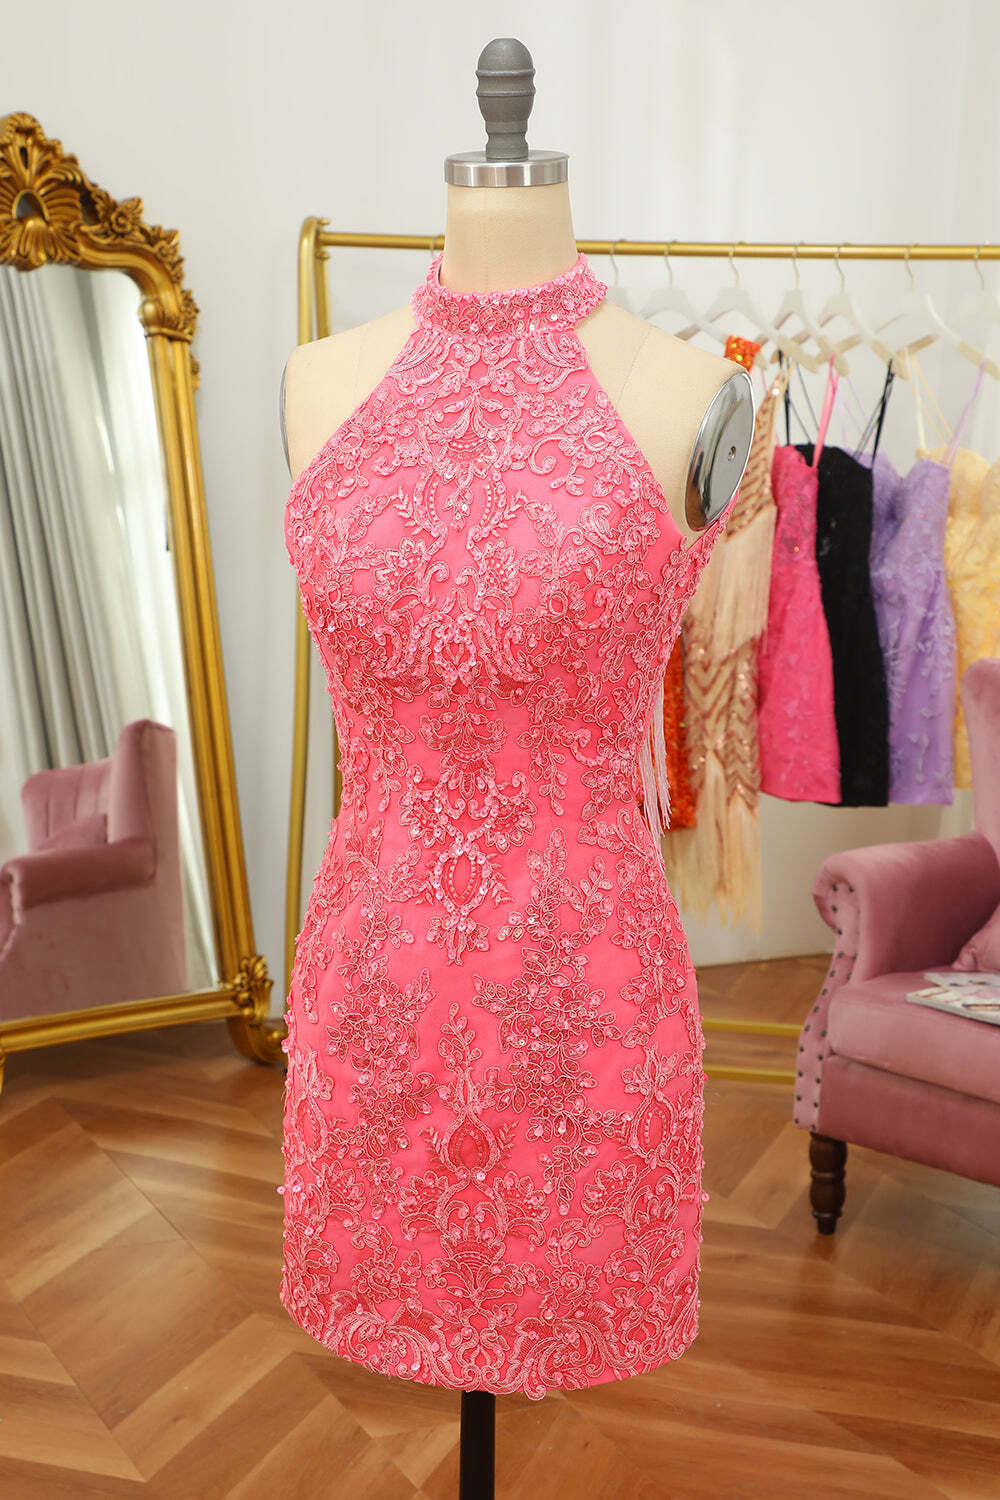 High Neck Hot Pink Lace Appliques Bodycon Mini Party Dress